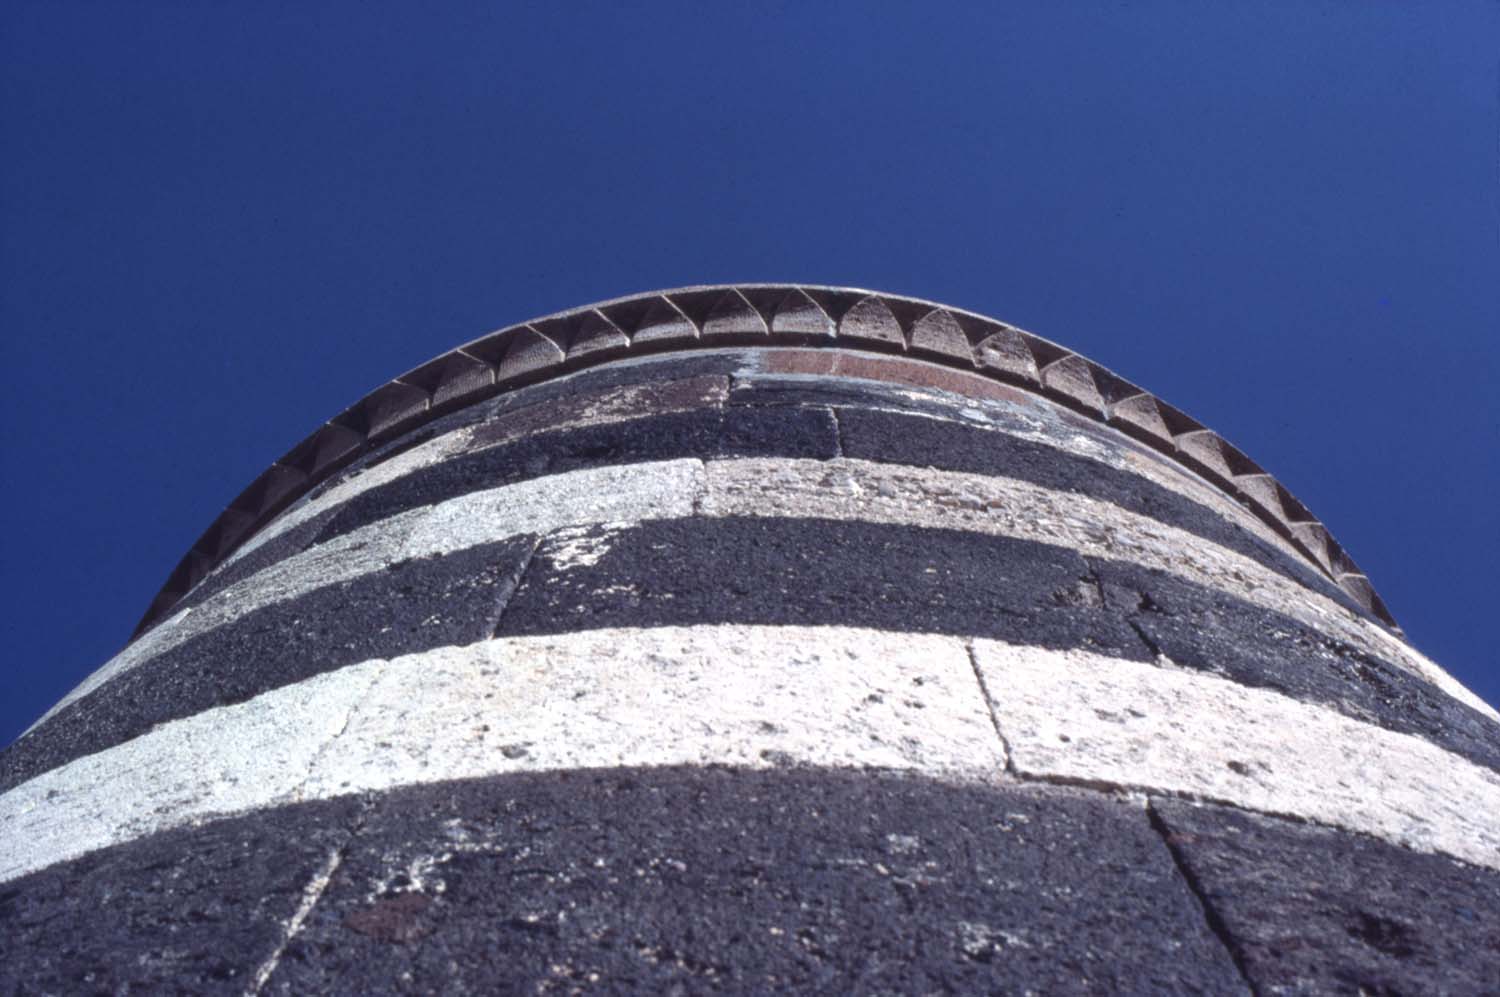 Detail view of minaret, showing use of alternating colors of stone on shaft and stone carving on cornice.